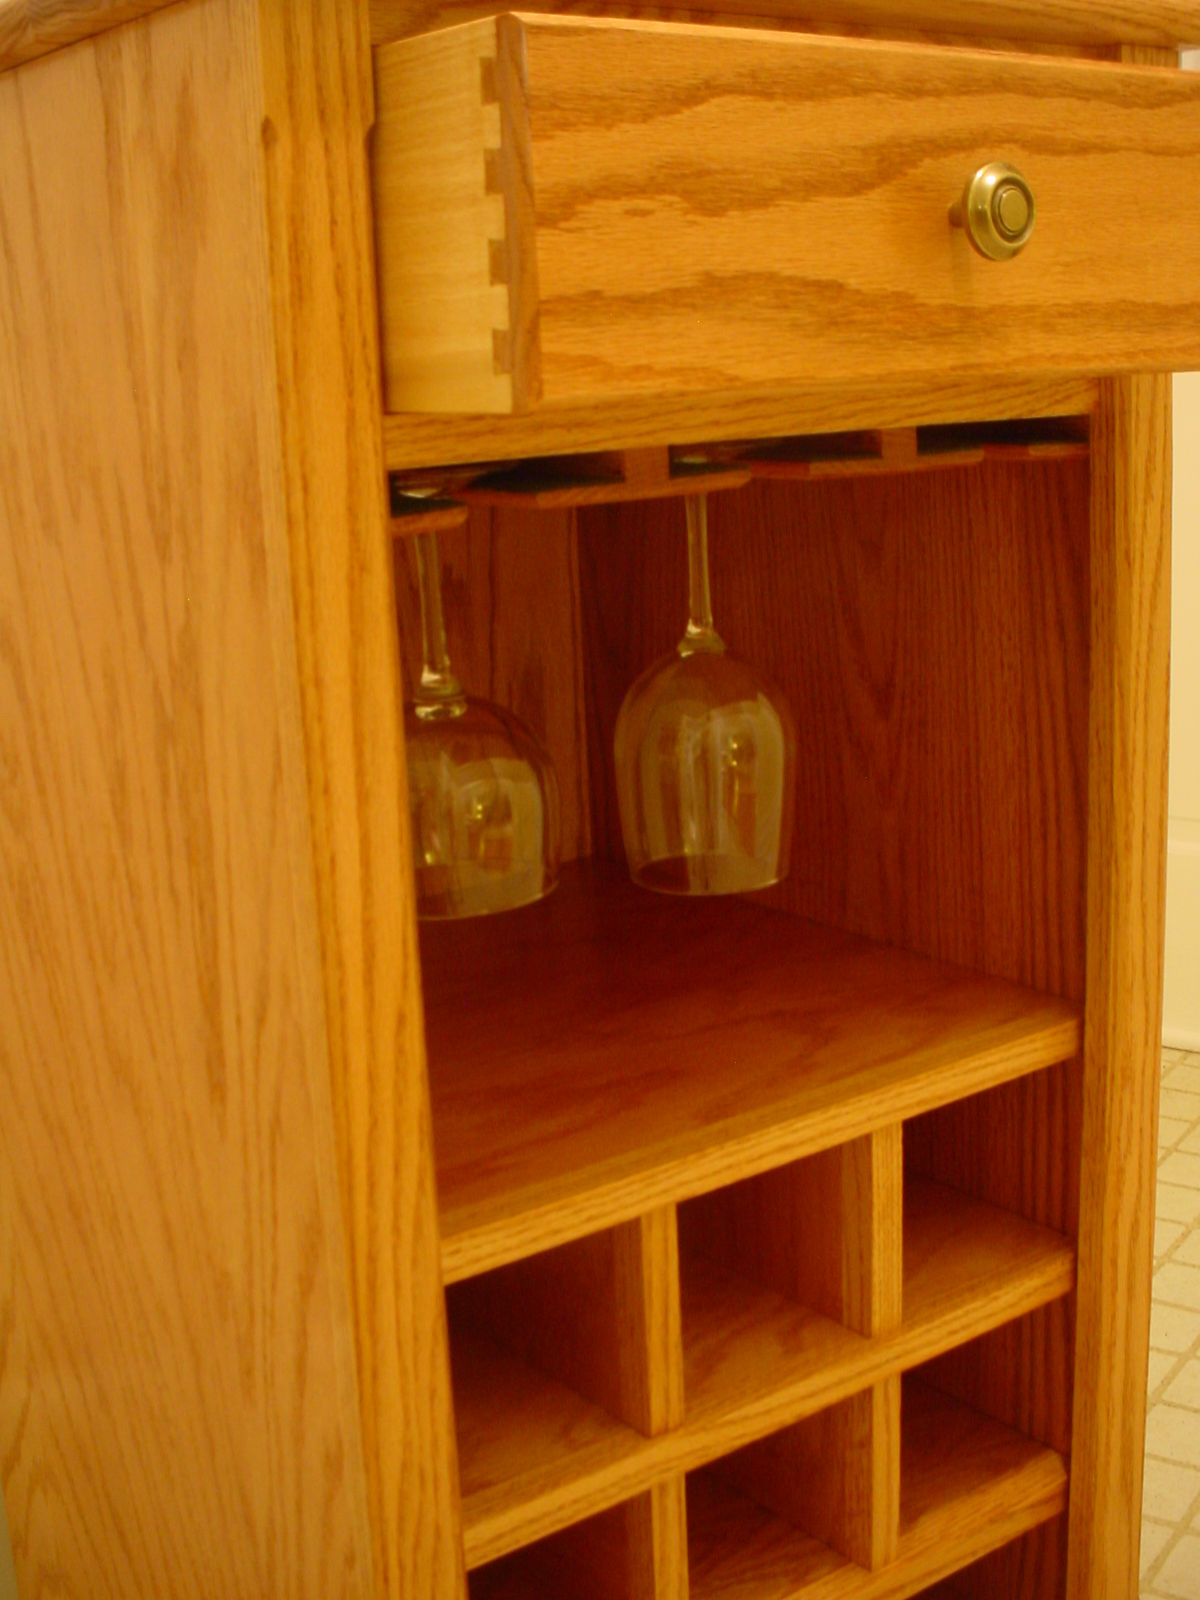 13.)Completed Wine Rack